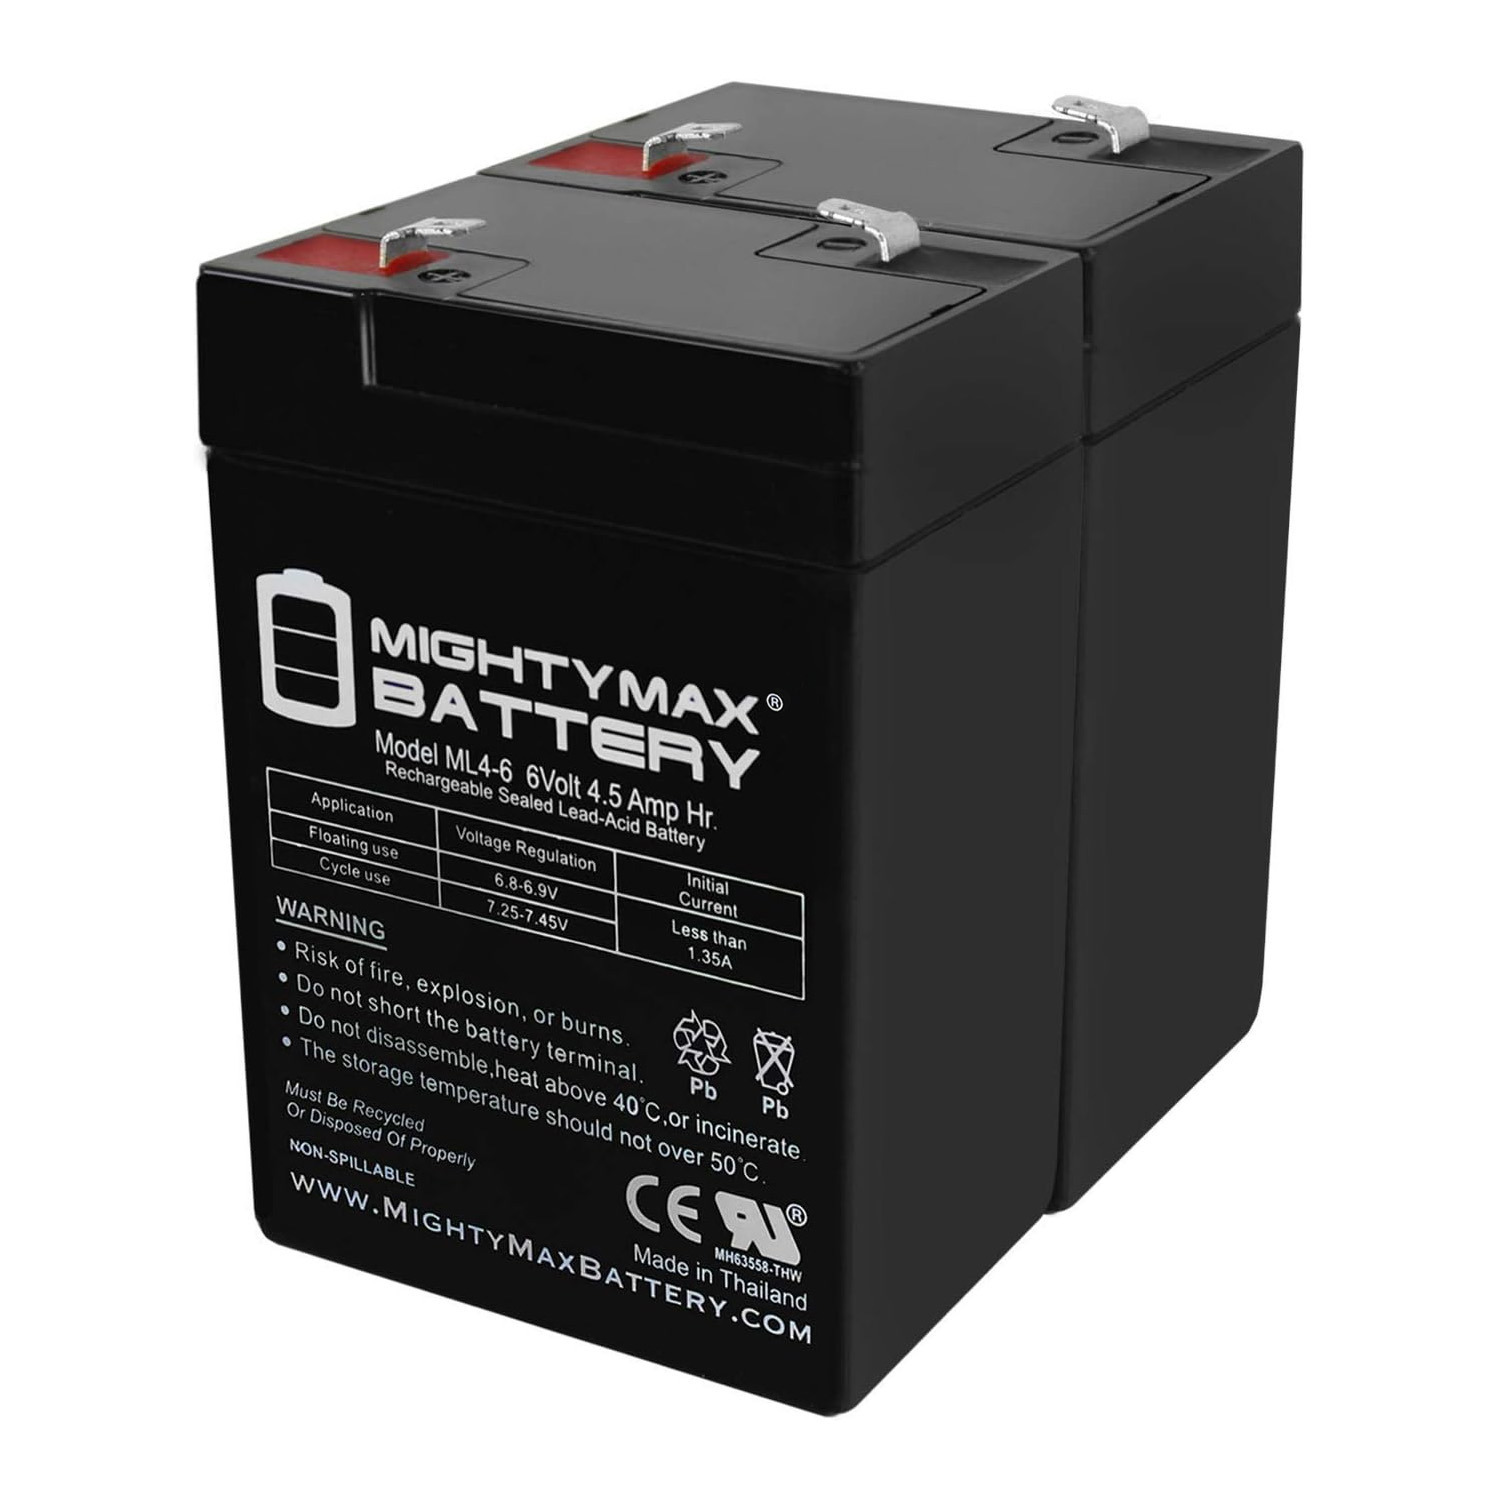 6V 4.5AH SLA Replacement Battery for Big Beam 2PH6S5 - 2 Pack